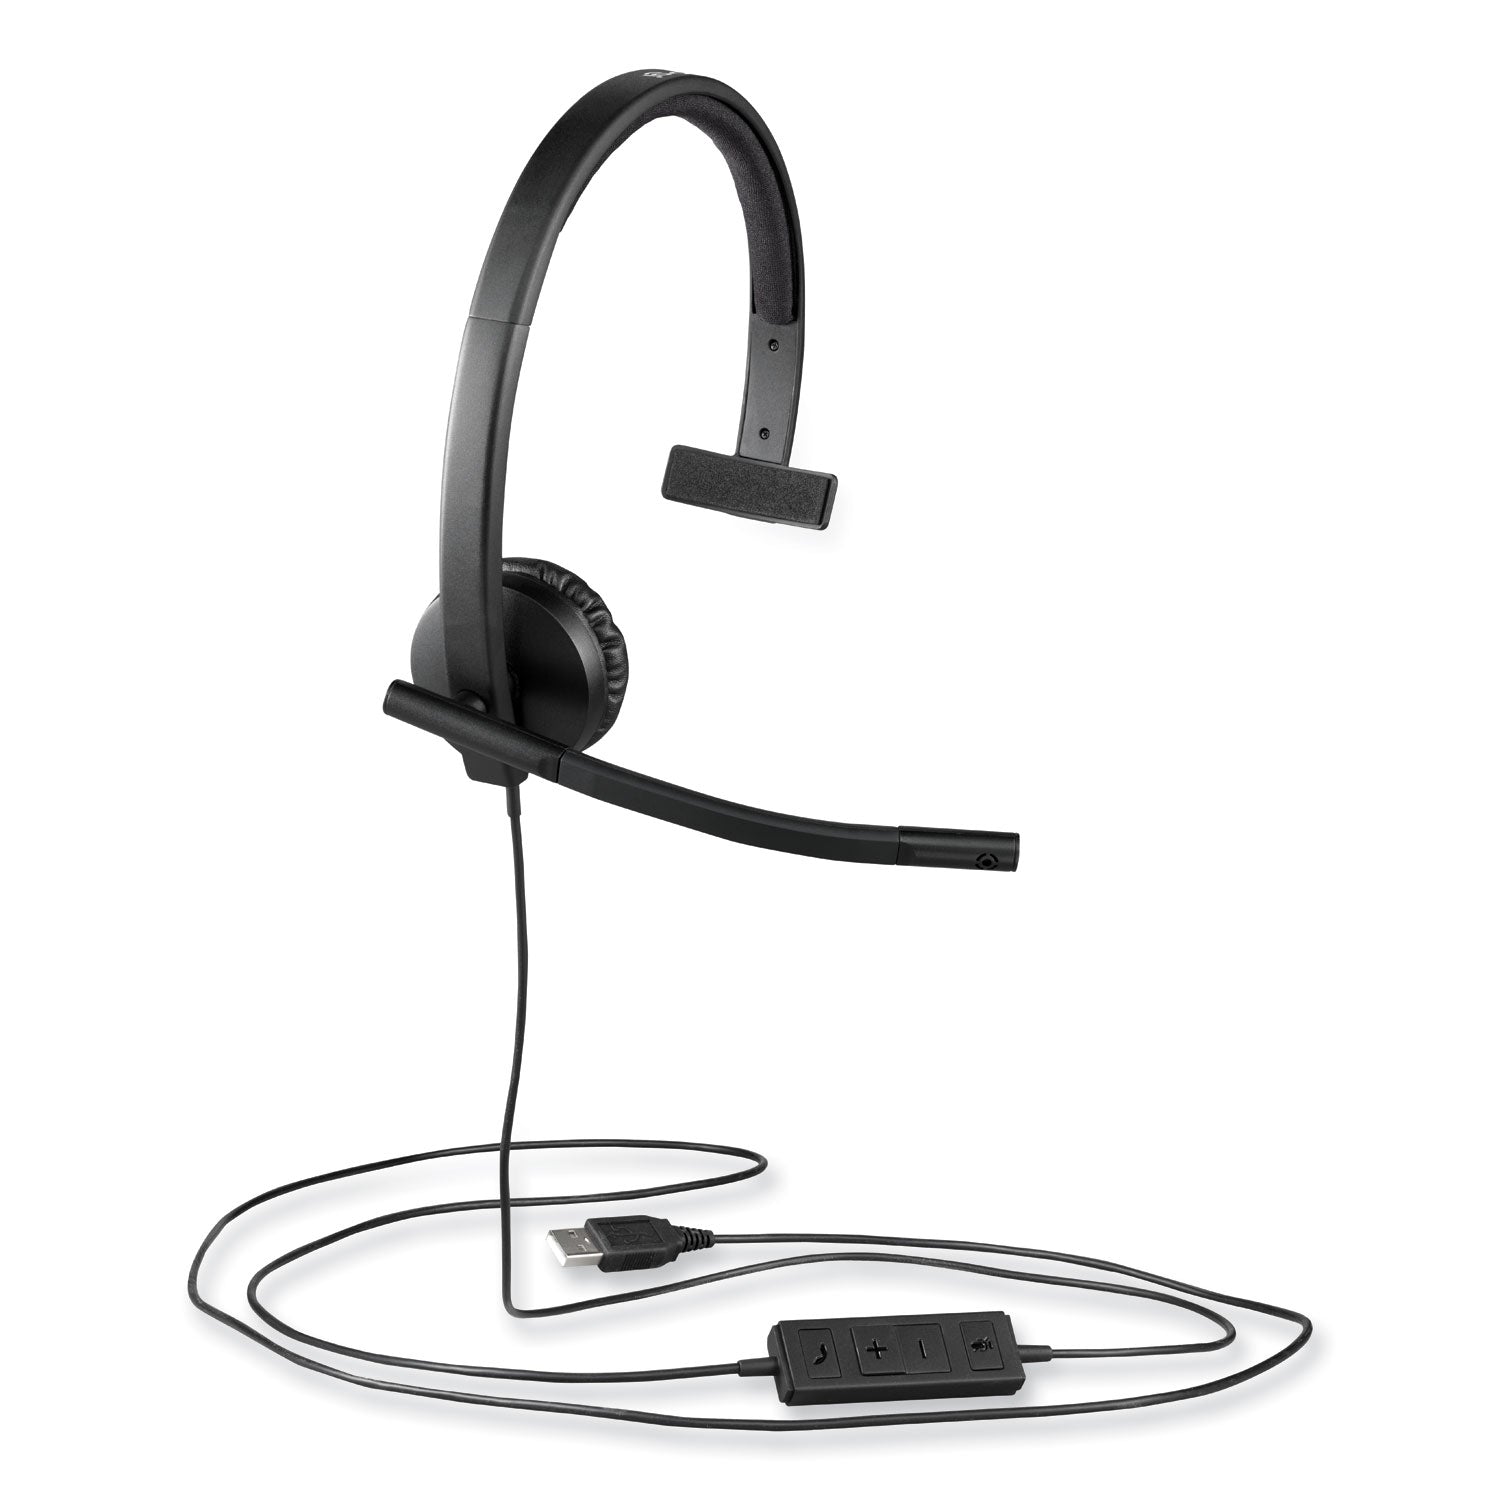 H570e Monaural Over The Head Wired Headset, Black - 